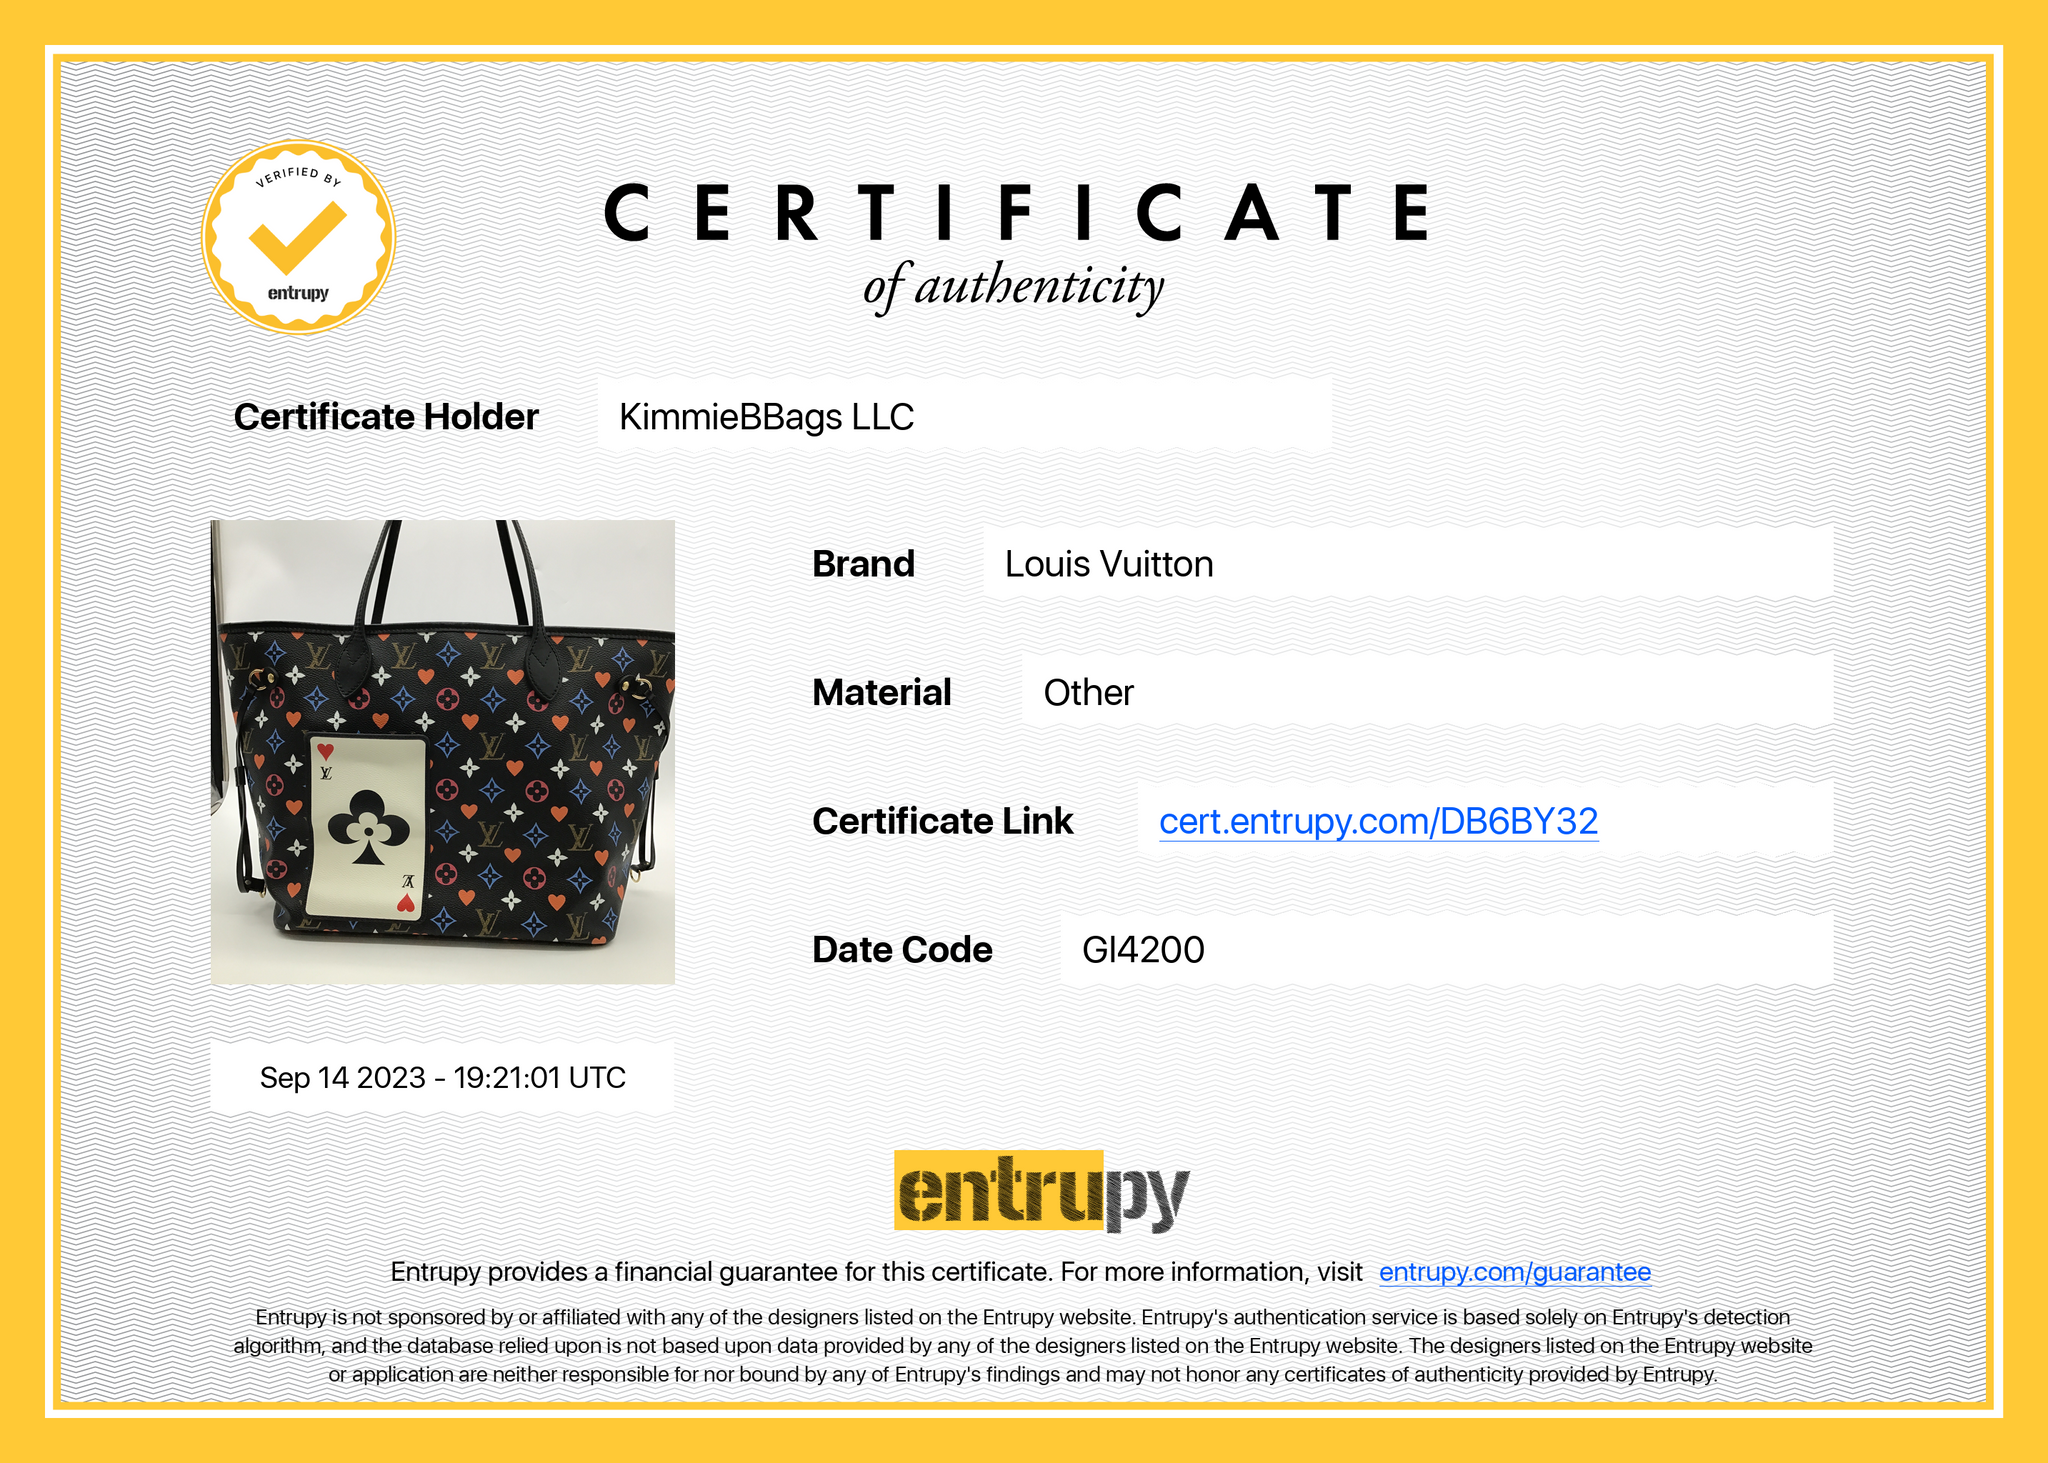 Sold Louis Vuitton Monogram Neverfull MM Game ON Limited 2020